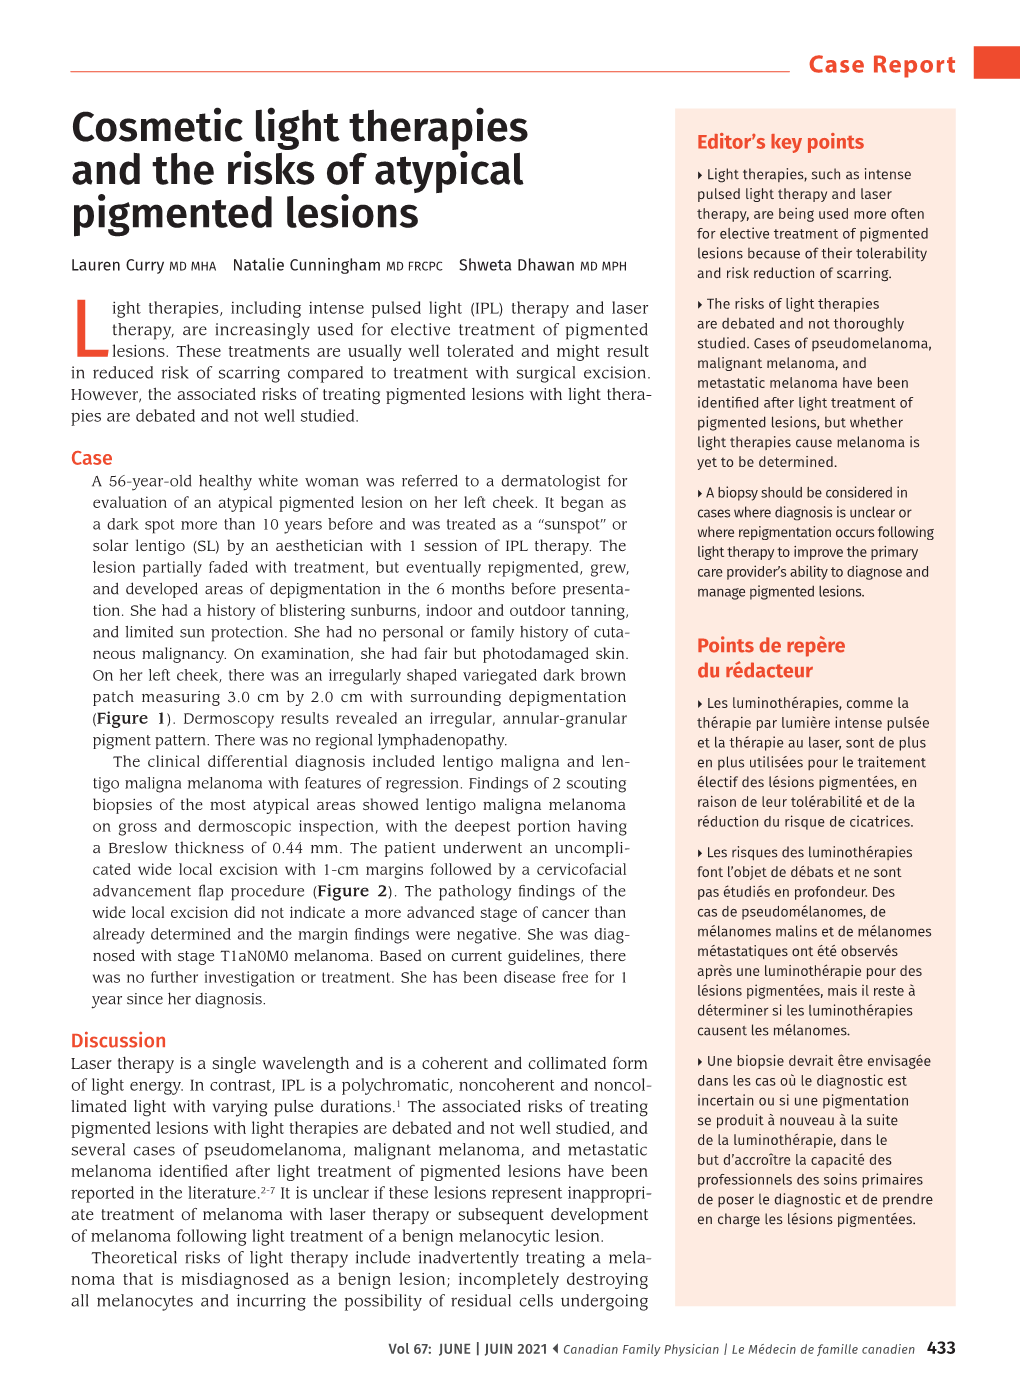 Cosmetic Light Therapies and the Risks of Atypical Pigmented Lesions